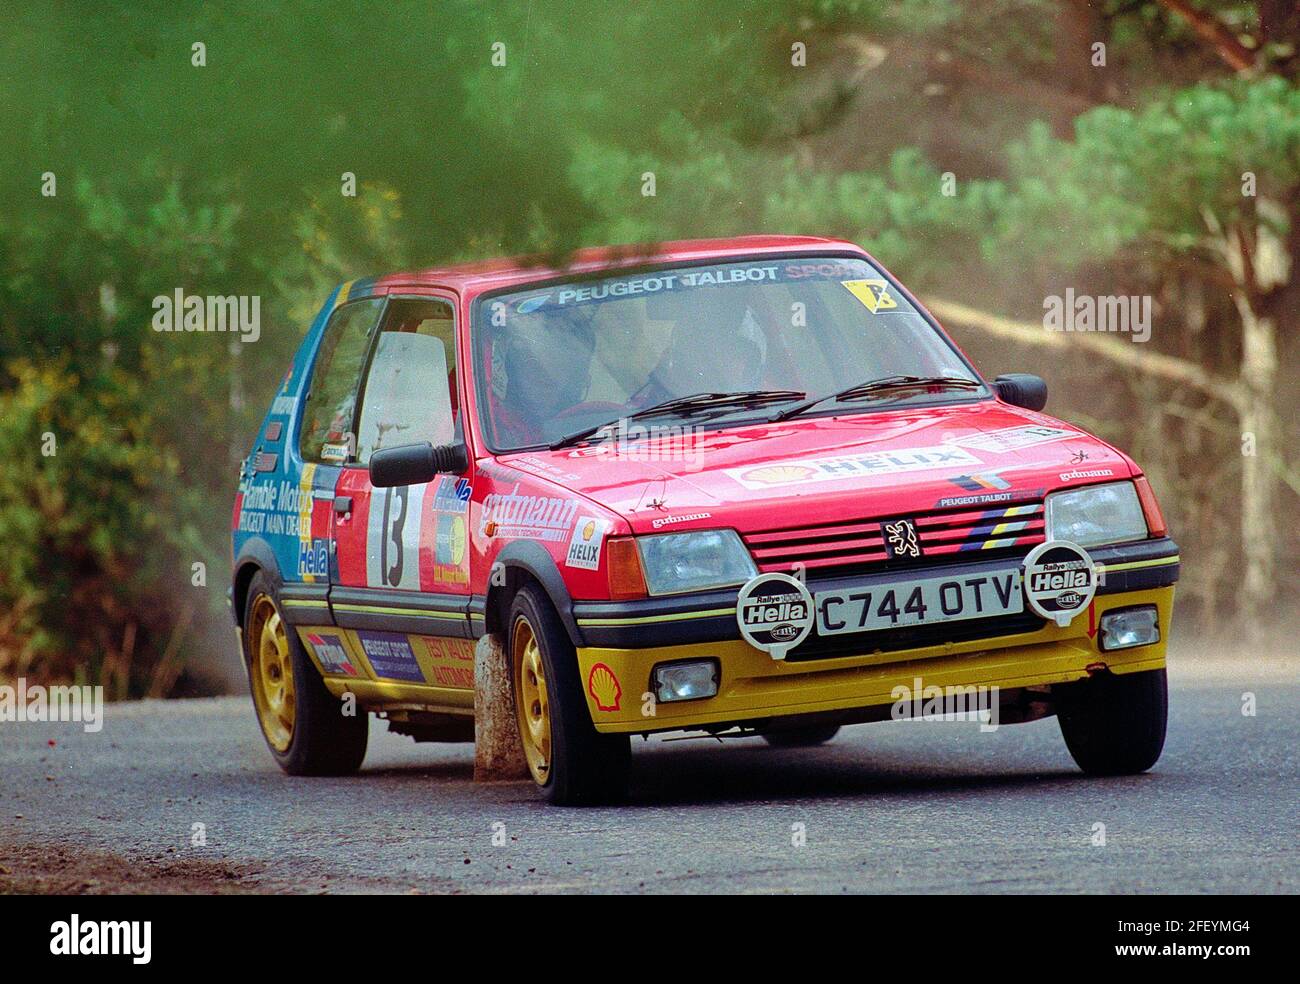 Peugeot 205 GTI rally car taking part in club car rallying event at Avon Park in January 1993. Stock Photo